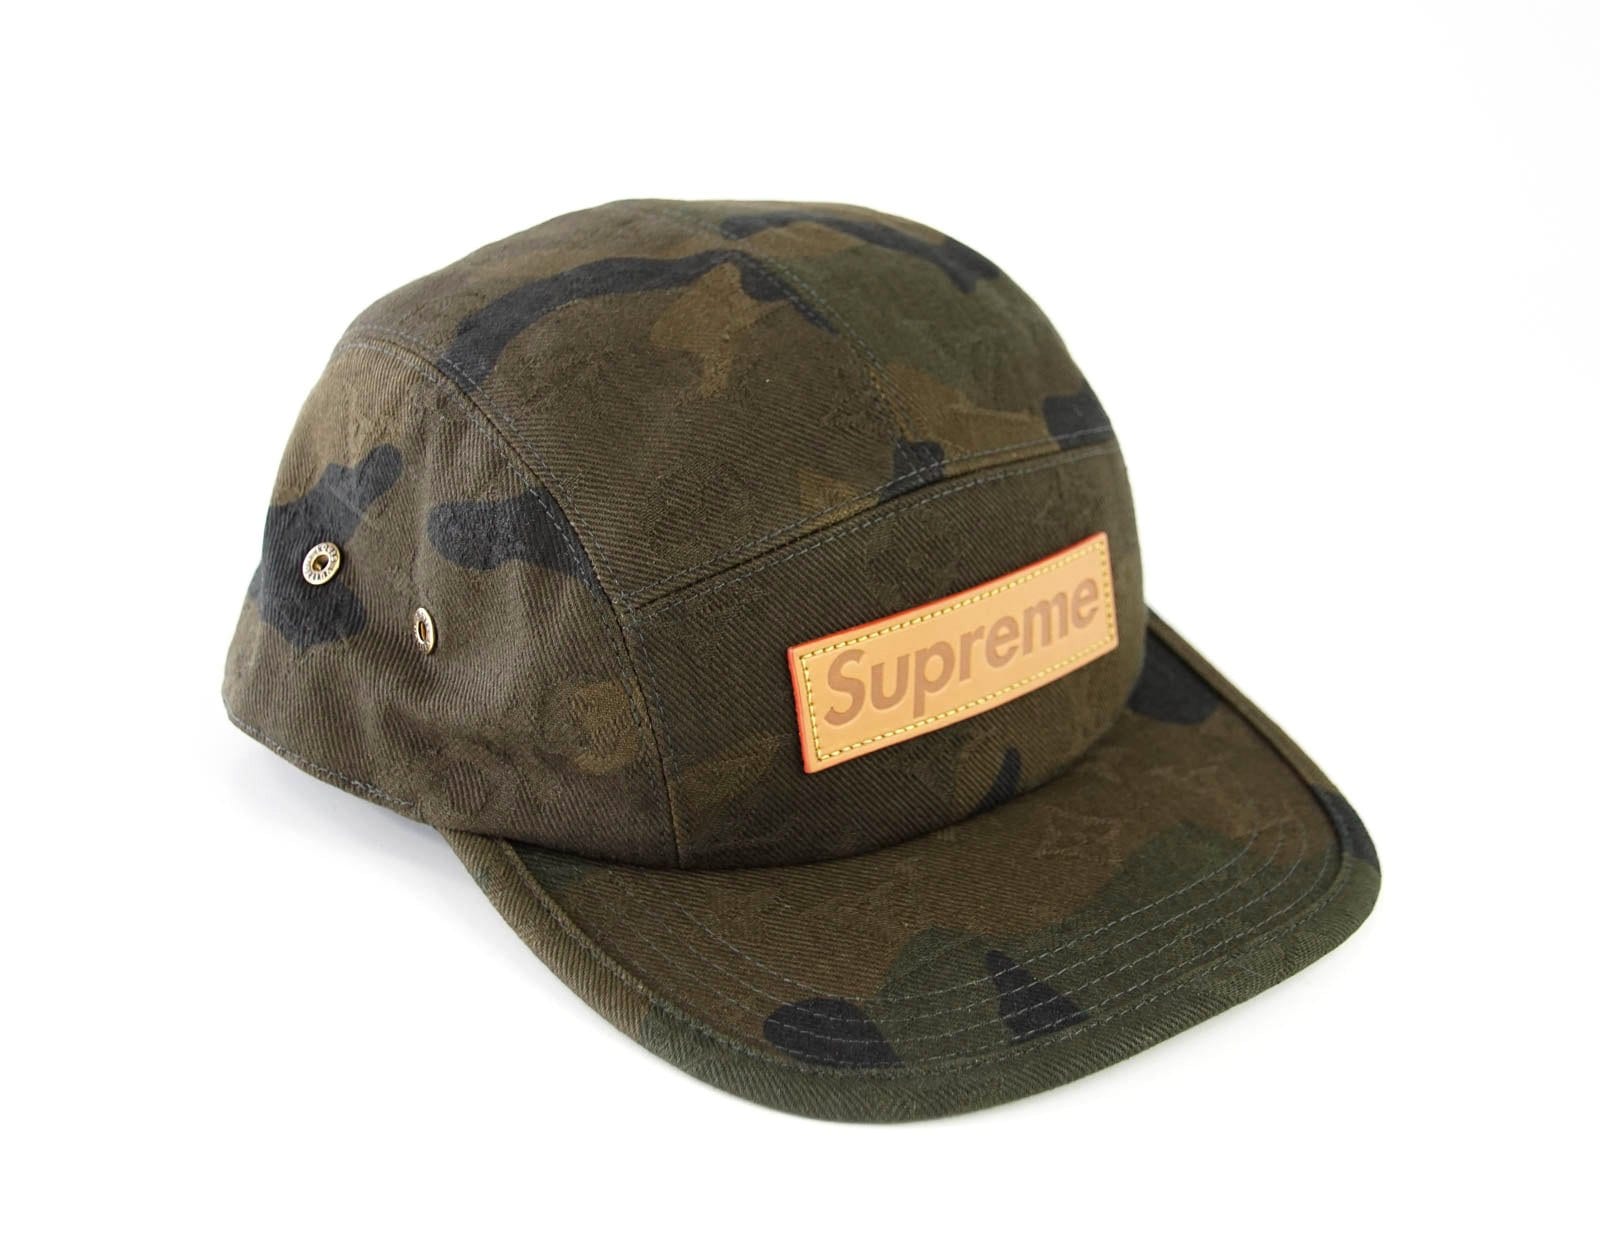 Louis Vuitton Men's Hat Supreme X Limited Edition 5 Panels Camouflage Cap - mightychic